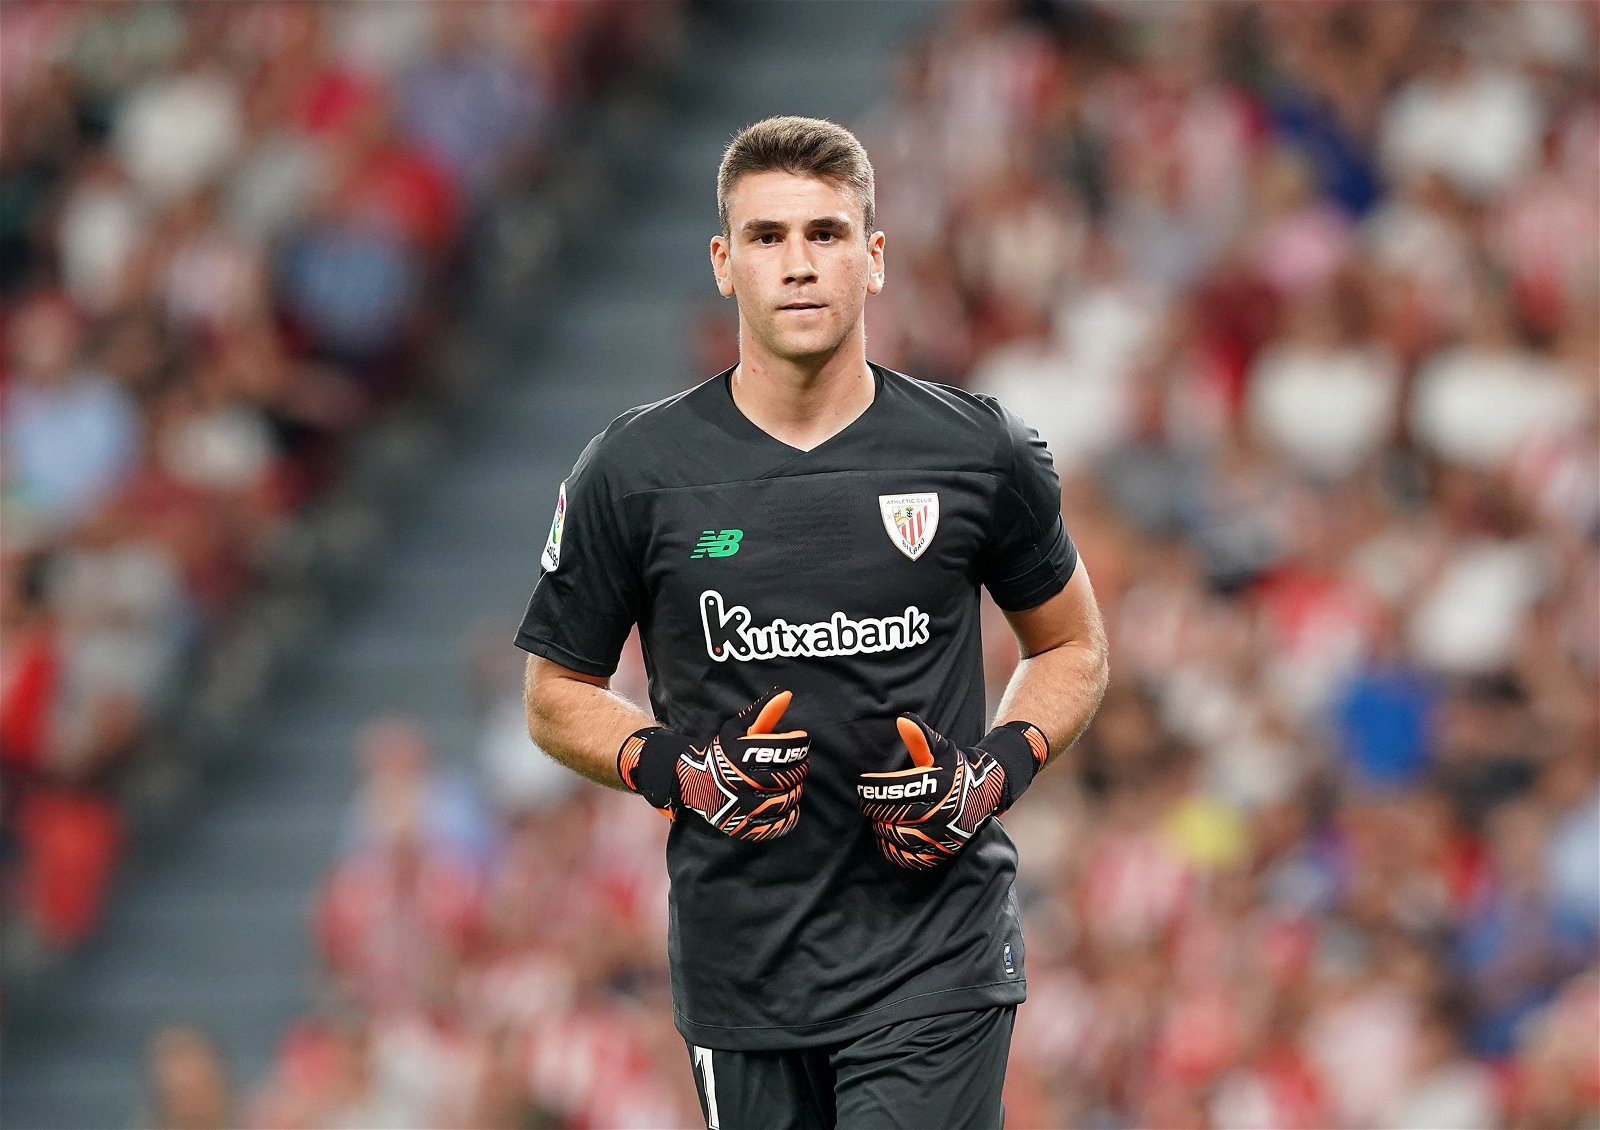 Real Madrid lining up Unai Simon as replacement for disappointing Thibaut Courtois